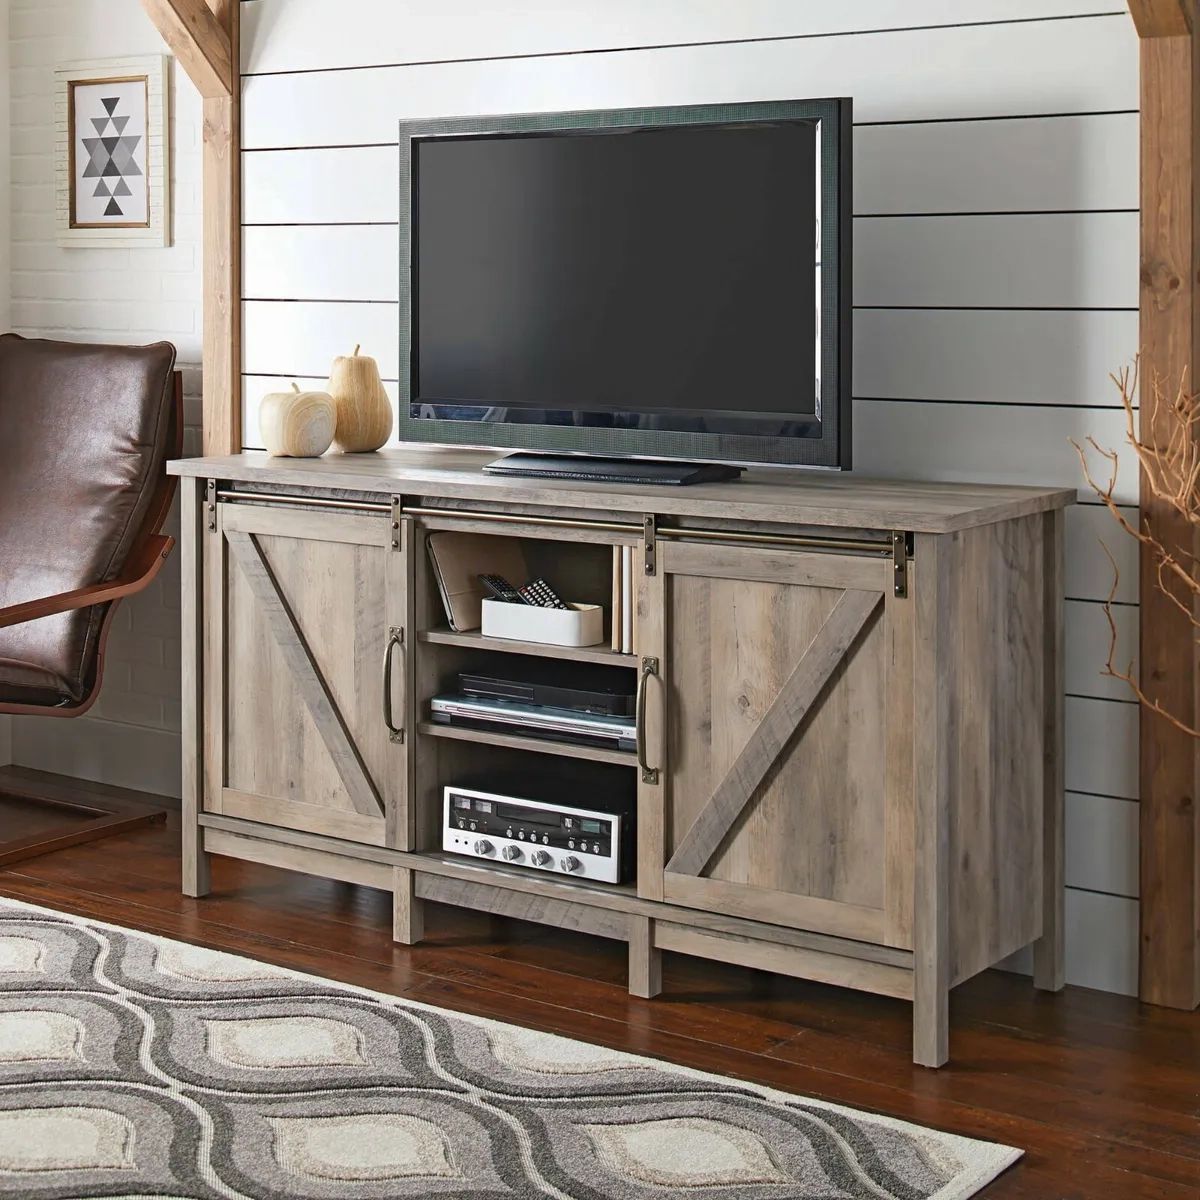 Better Homes And Gardens Modern Farmhouse Tv Stand For Tvs Up To 70", Rustic  Gra | Ebay Intended For Modern Farmhouse Rustic Tv Stands (View 4 of 15)